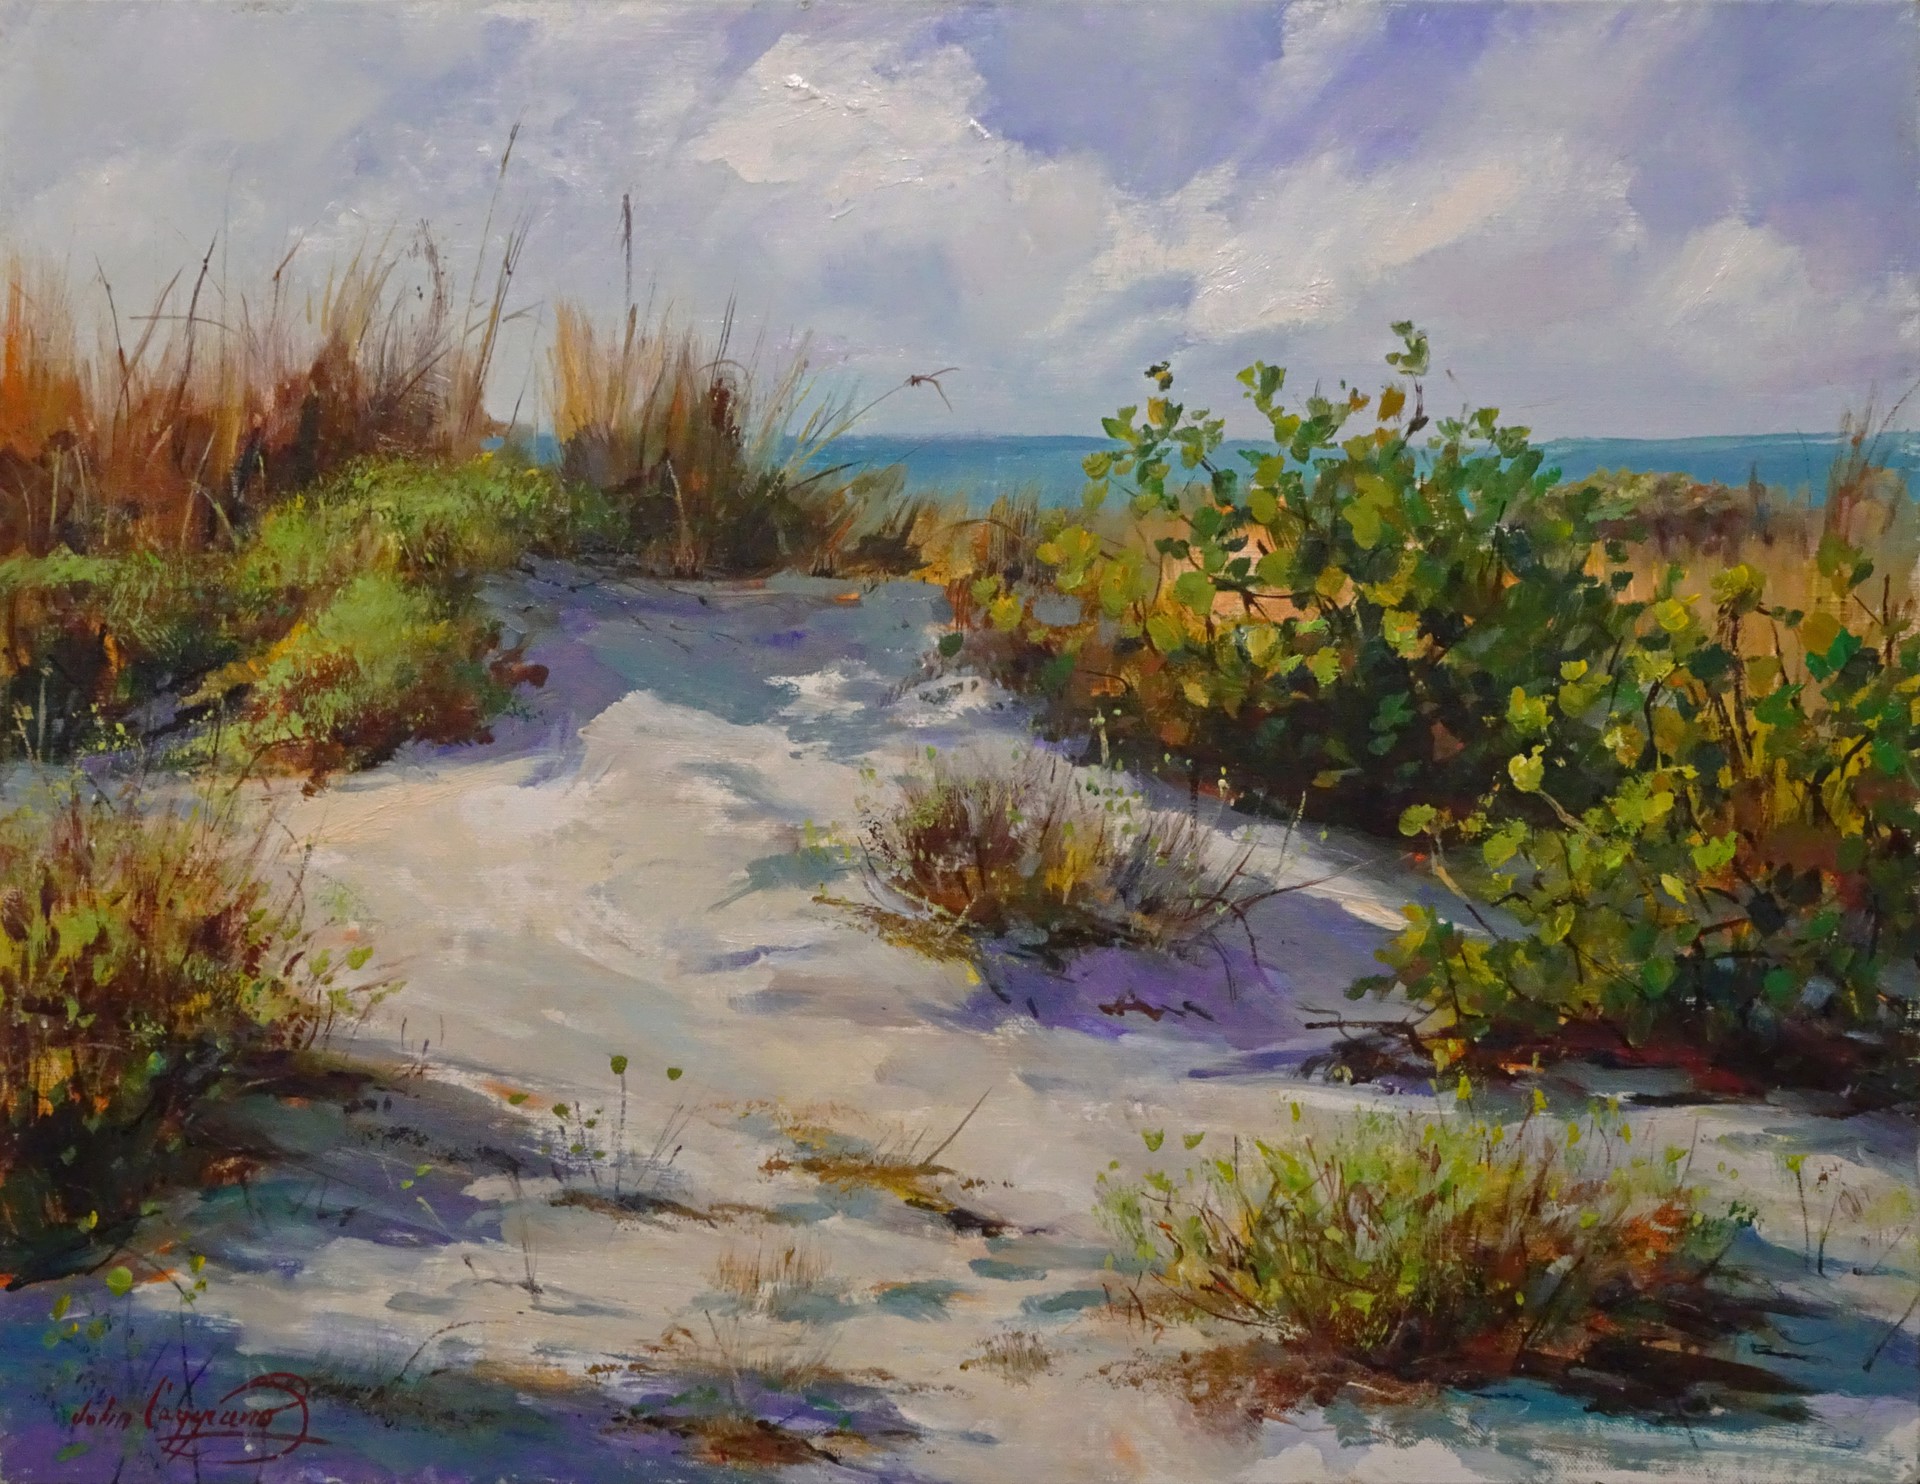 Over the Dunes by John S Caggiano